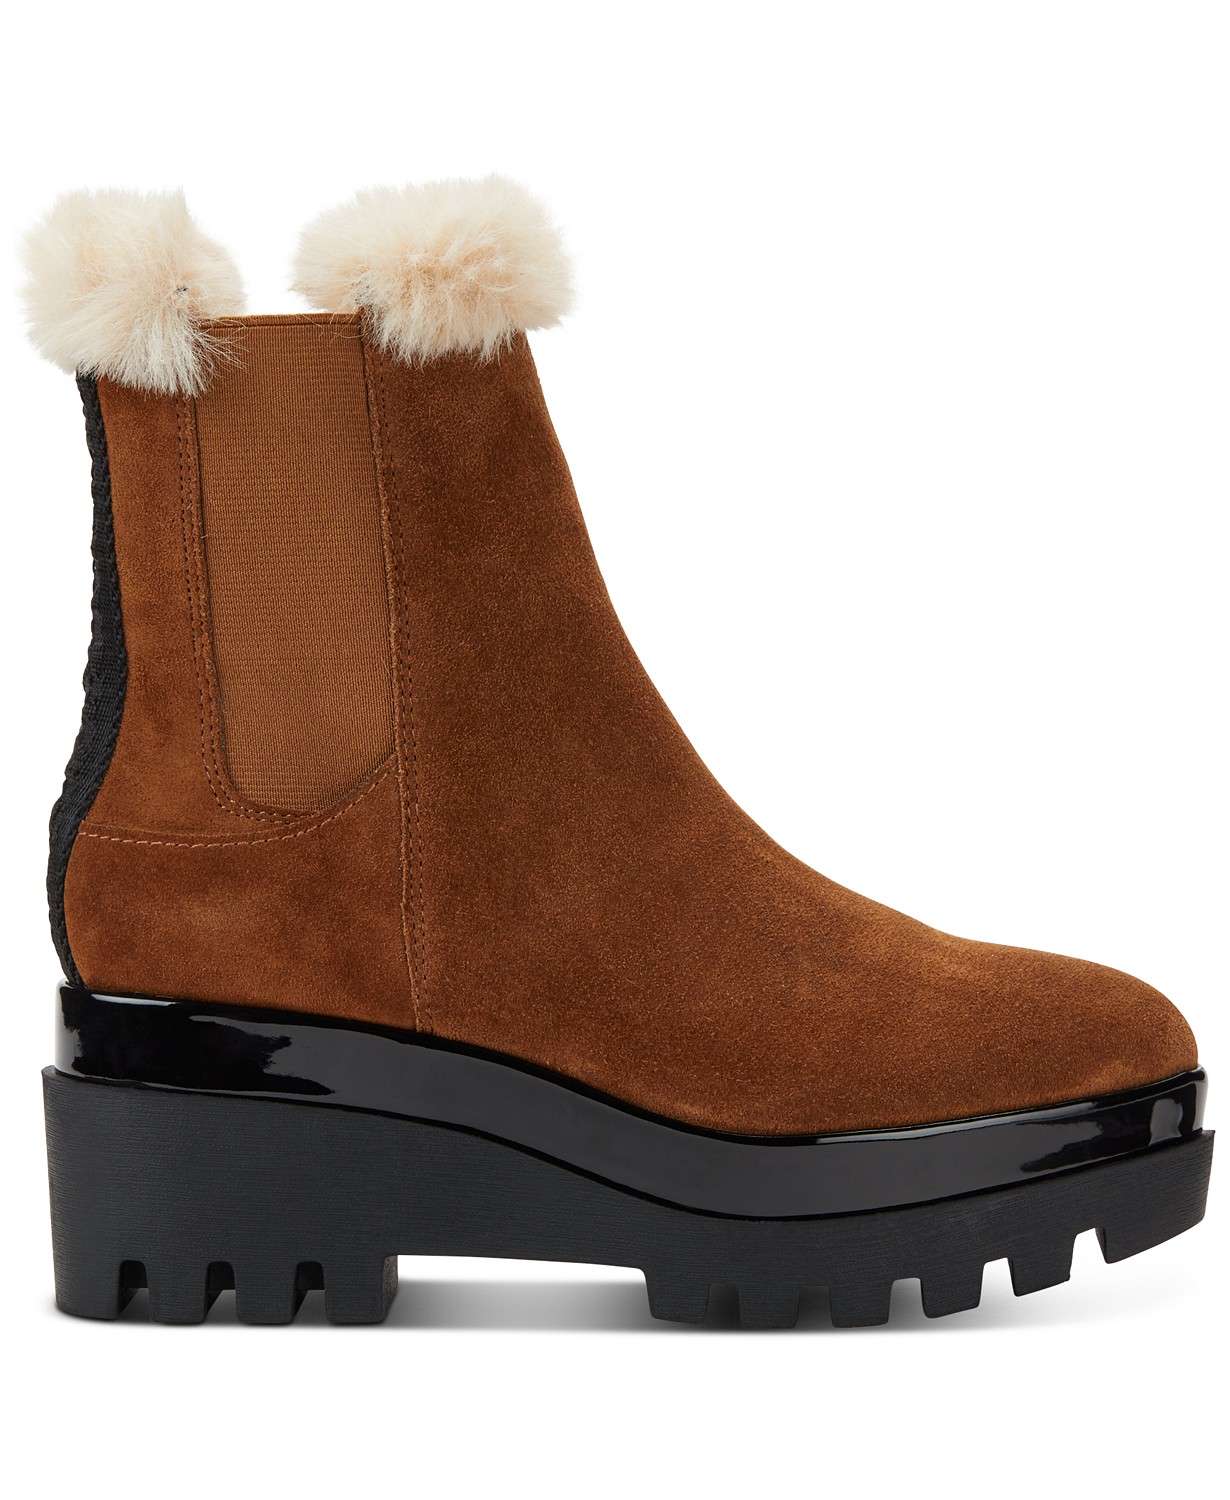 woocommerce-673321-2209615.cloudwaysapps.com-dkny-womens-brown-suede-bax-wedge-lug-sole-booties